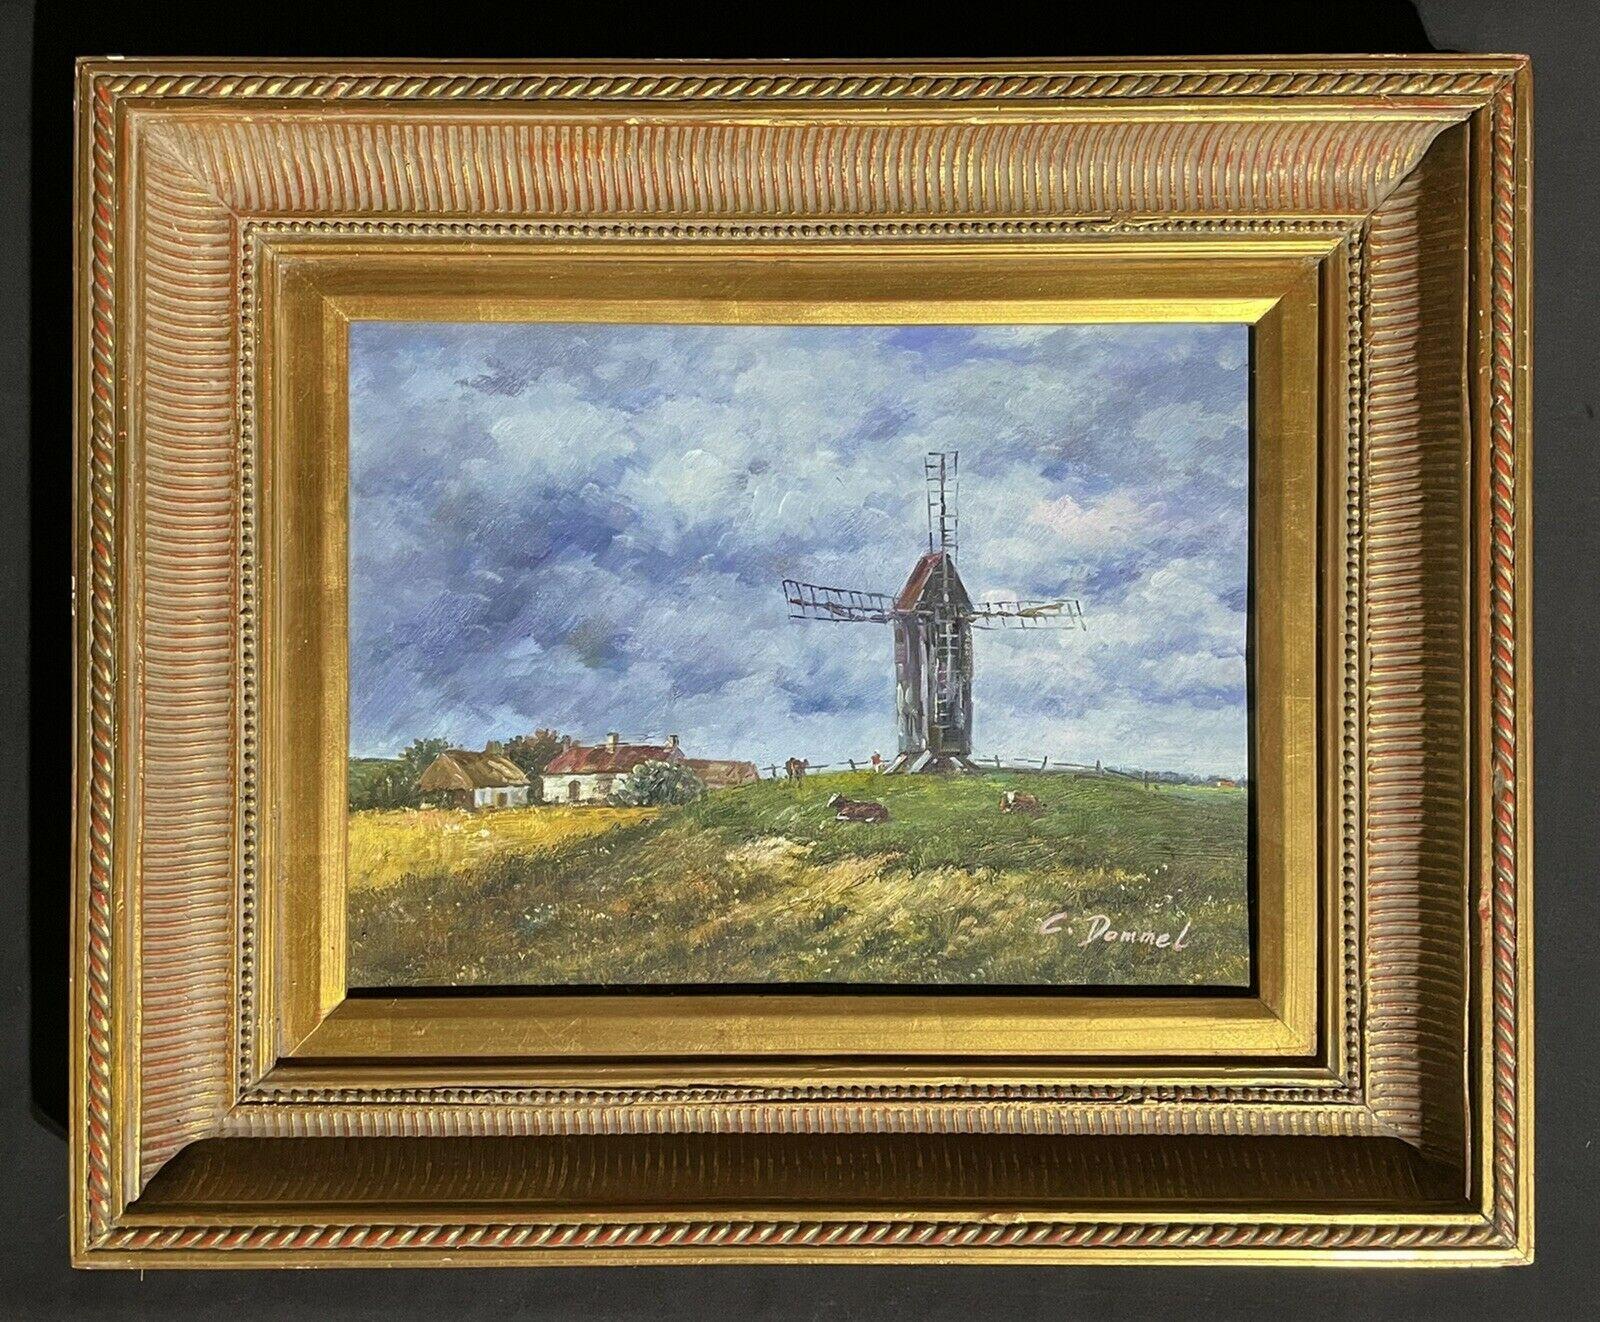 SIGNED FRENCH IMPRESSIONIST OIL PAINTING - WINDMILL IN RURAL FARM LANDSCAPE